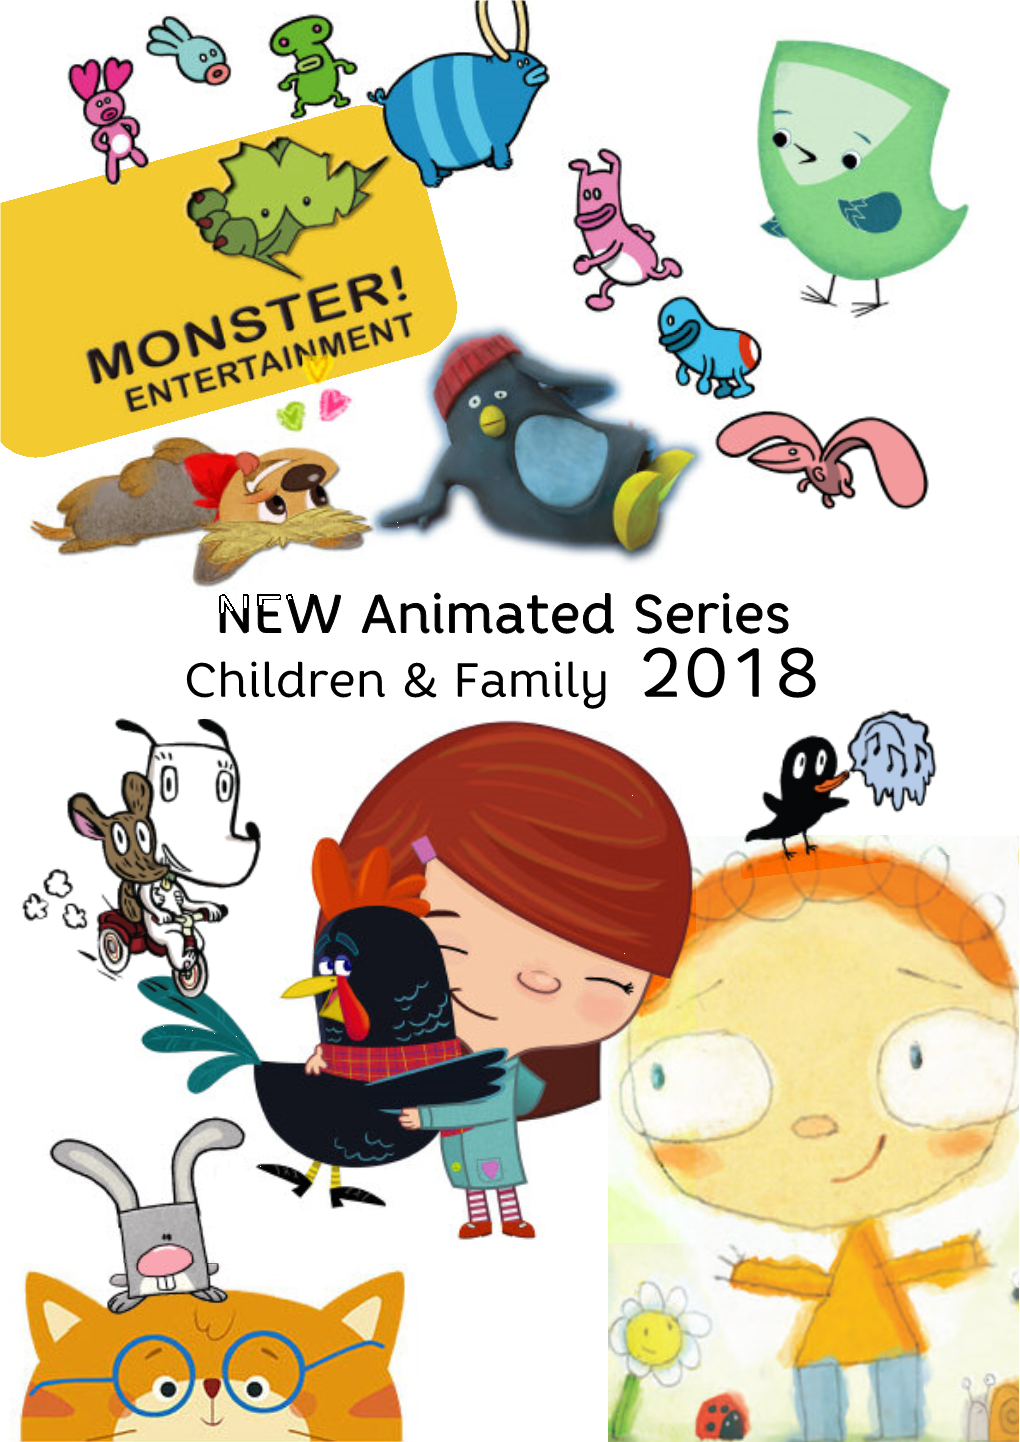 NEW Animated Series Children & Family 2018 Monster Entertainment Non Dialogue 3 - 7 Series N Ew